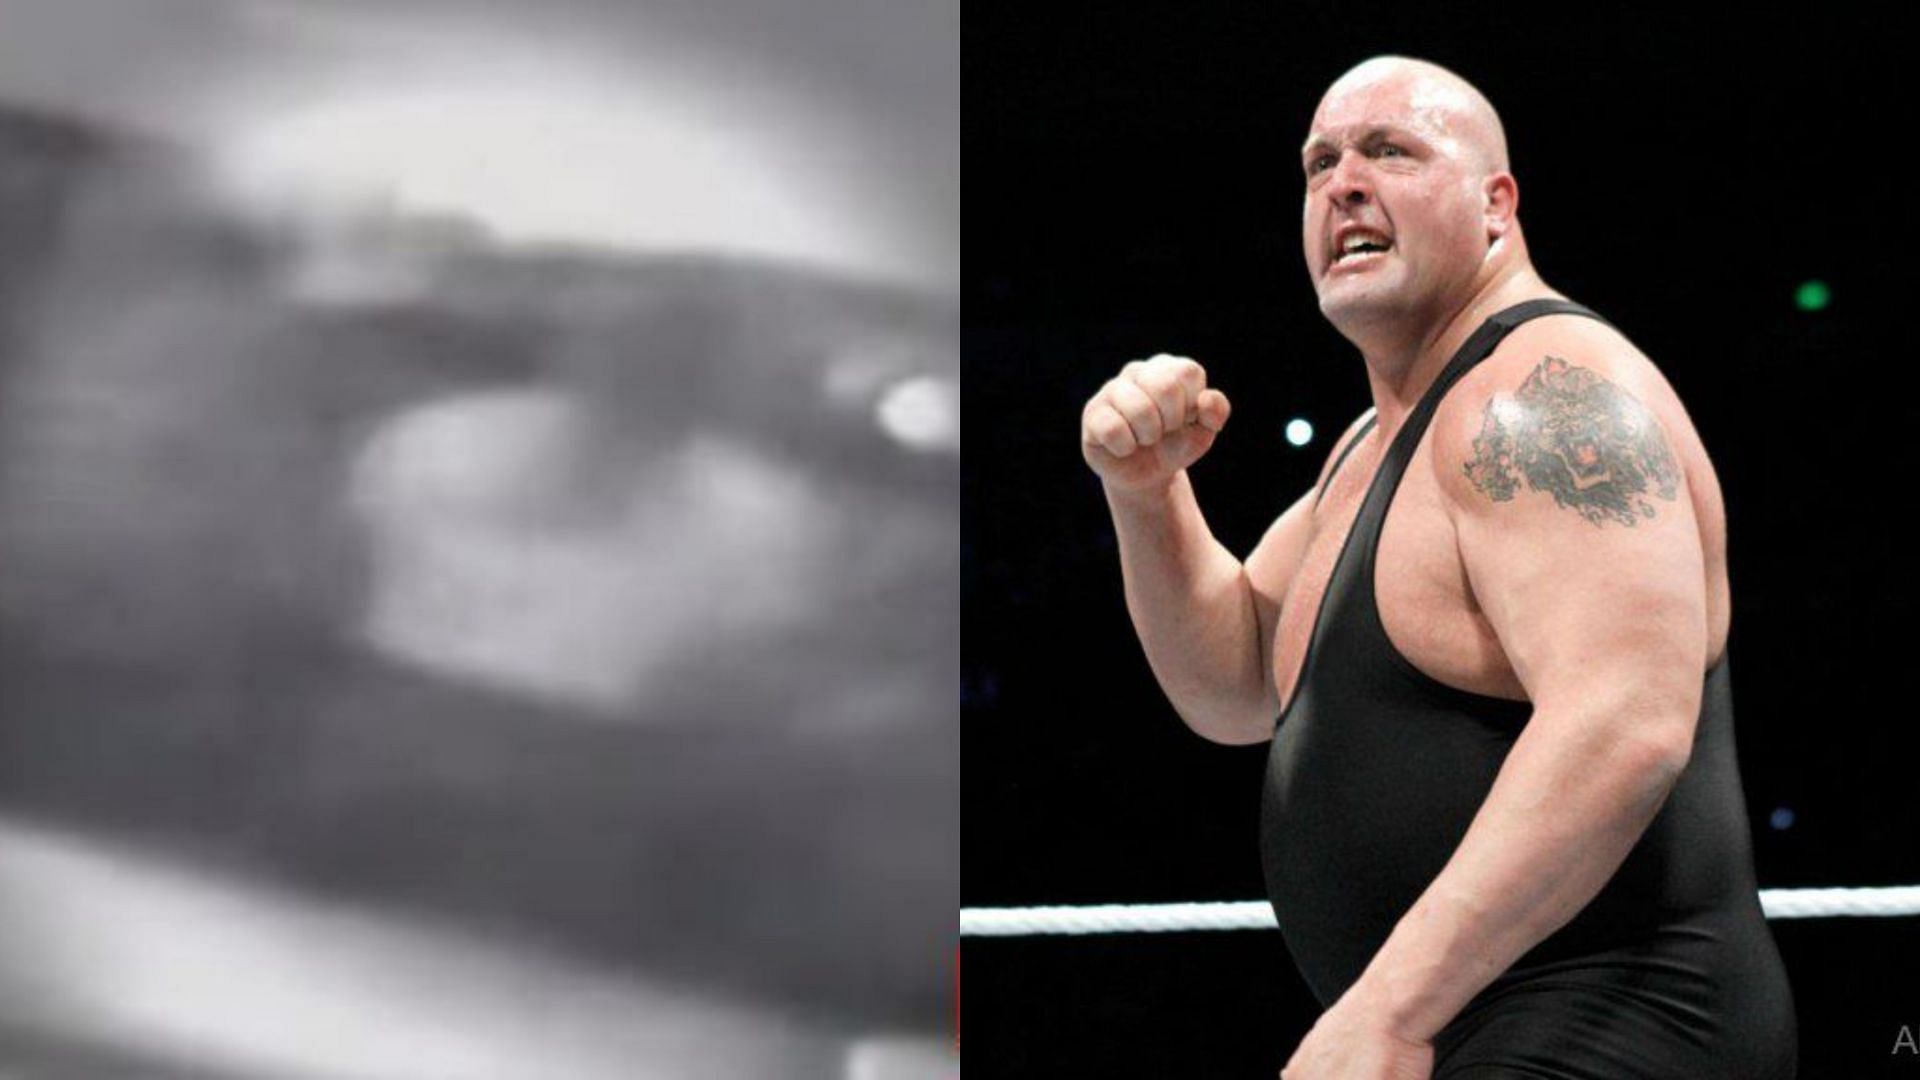 Paul Wight (aka Big Show) punched a fan in 1998